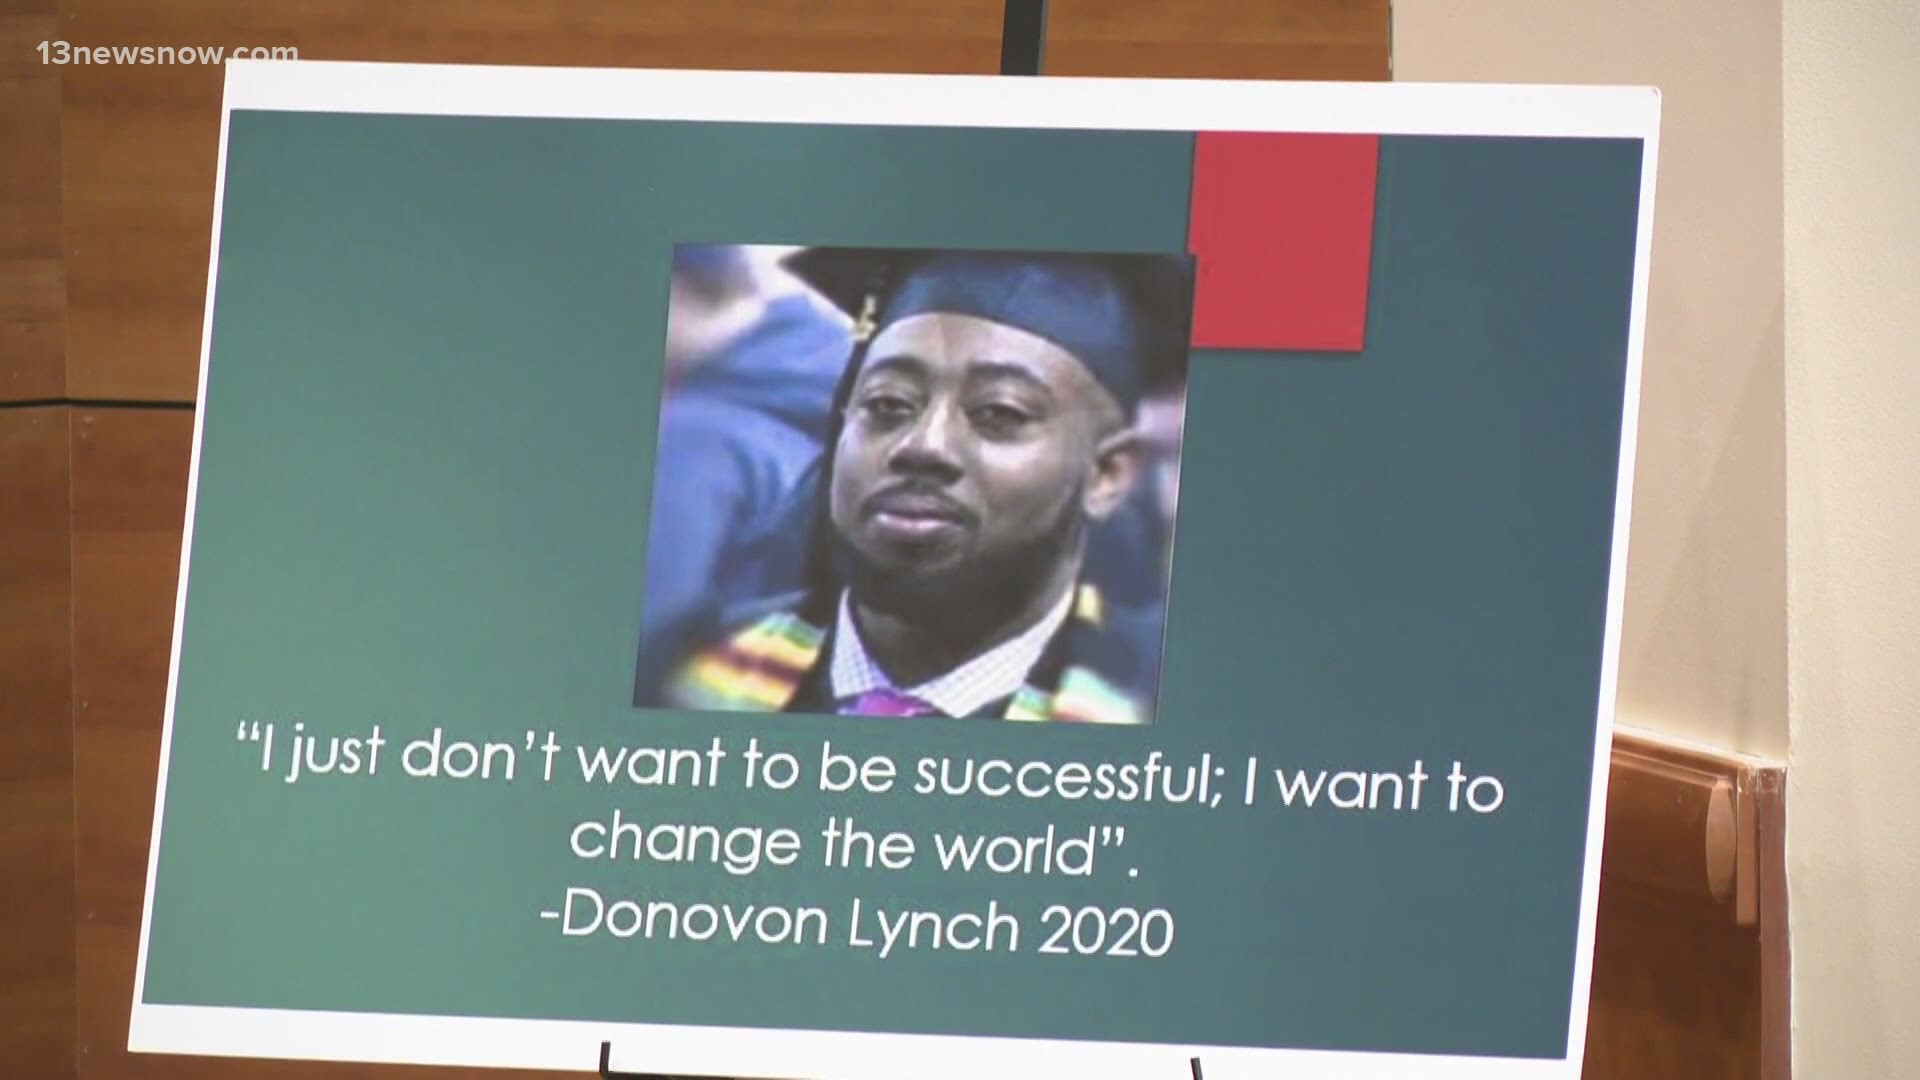 A Virginia Beach police officer shot and killed Lynch in March. The family has launched the Donovon Lynch Foundation, and they're waiting for updates in the case.